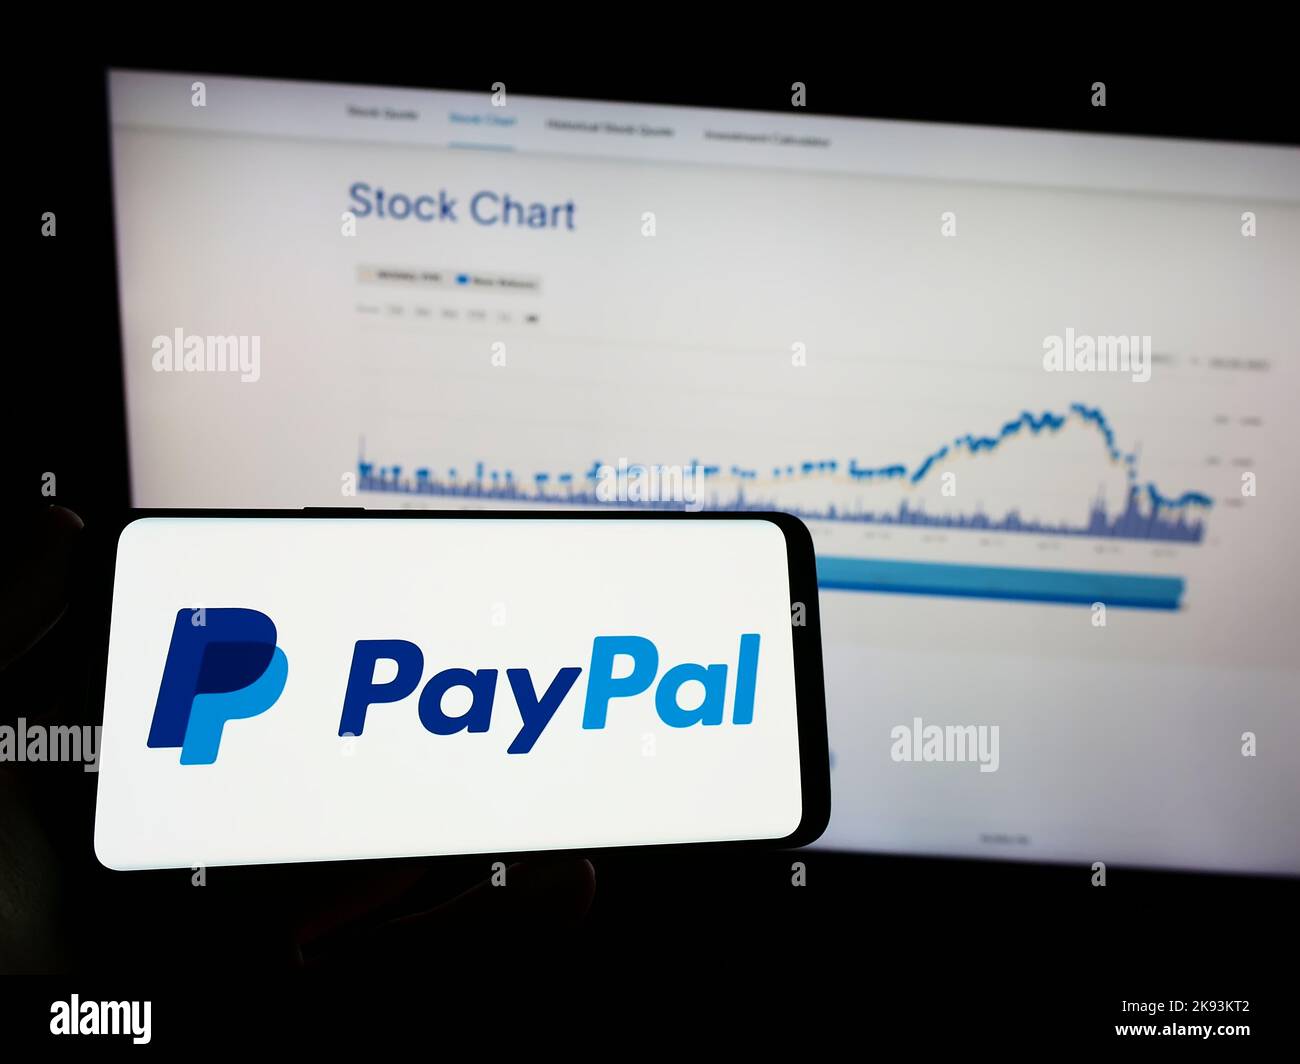 Person holding mobile phone with logo of American financial company PayPal Holdings Inc. on screen in front of web page. Focus on phone display. Stock Photo